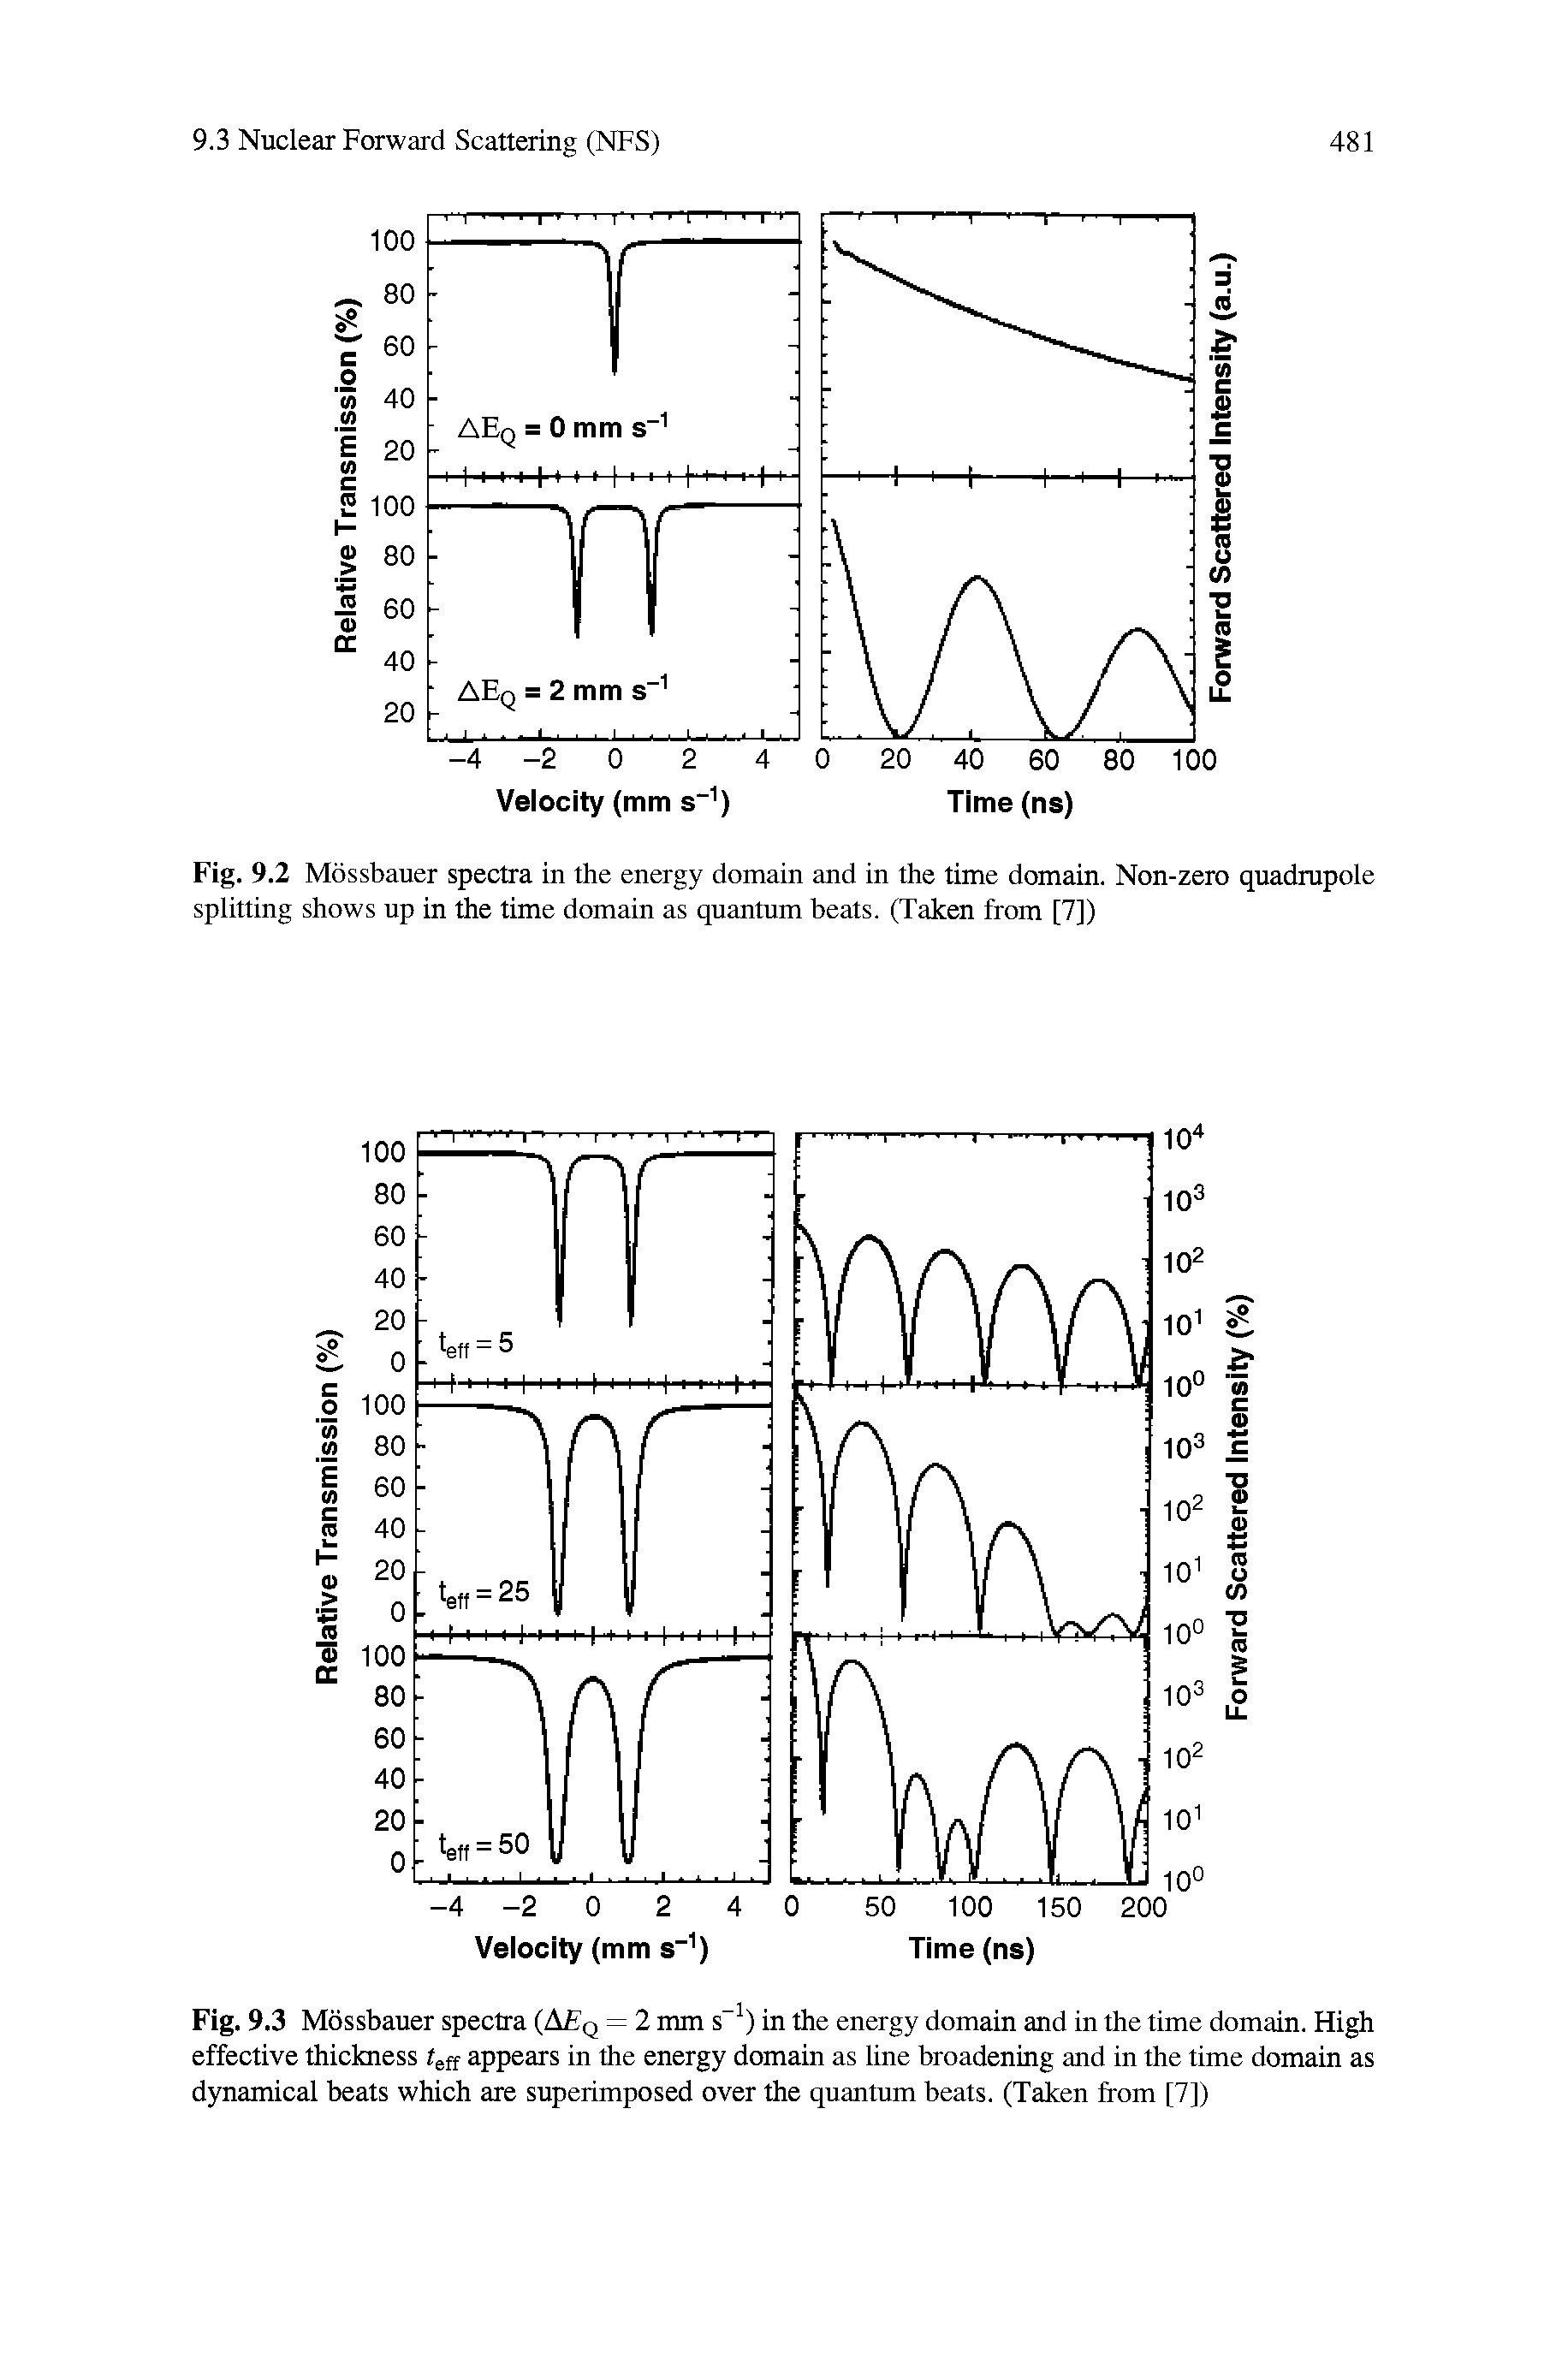 Fig. 9.2 Mossbauer spectra in the energy domain and in the time domain. Non-zero quadrupole splitting shows up in the time domain as quantum beats. (Taken from [7])...